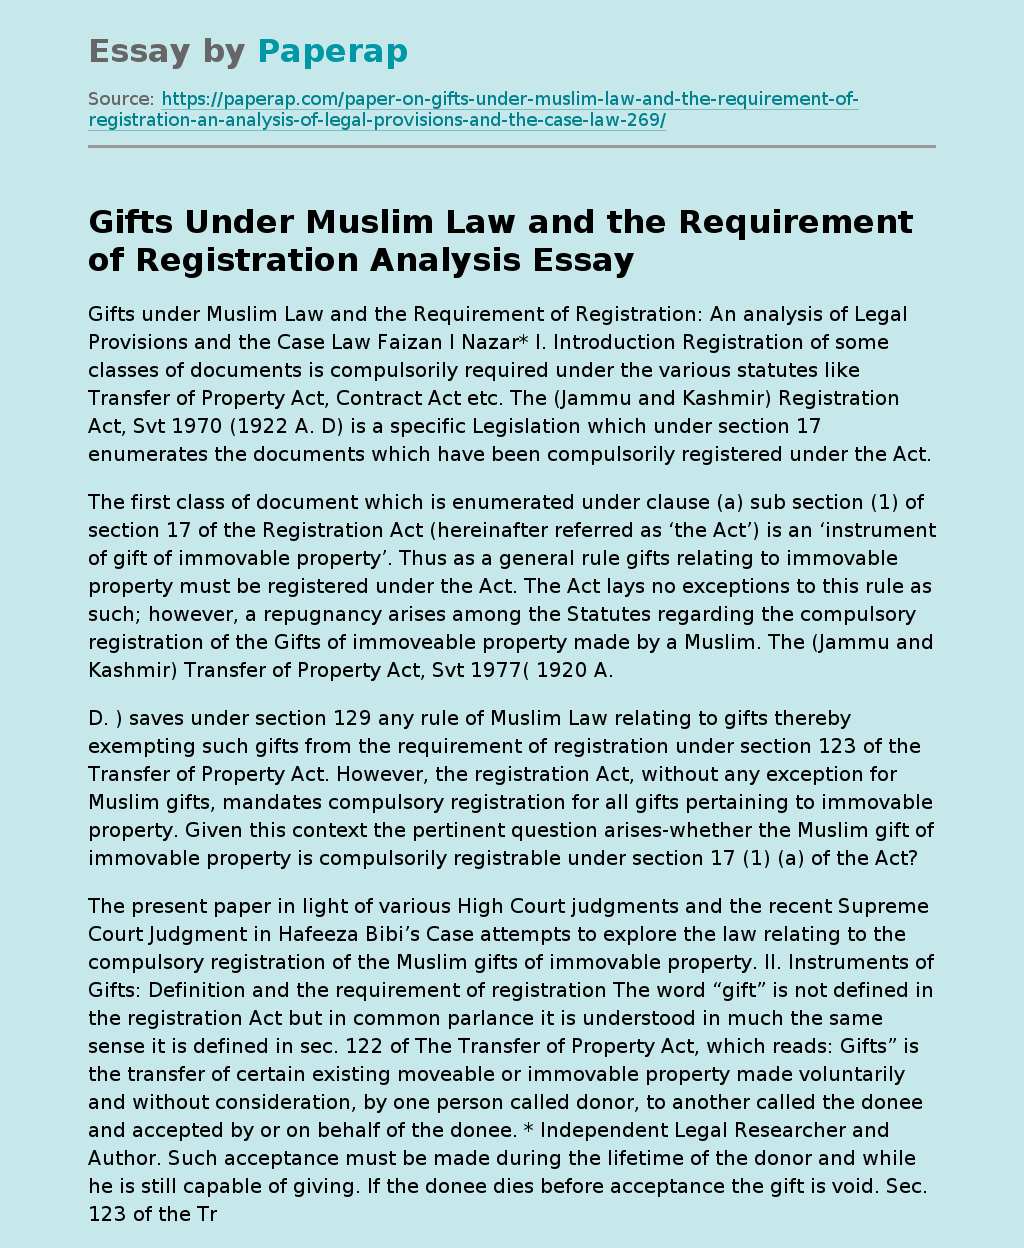 Gifts Under Muslim Law and the Requirement of Registration Analysis